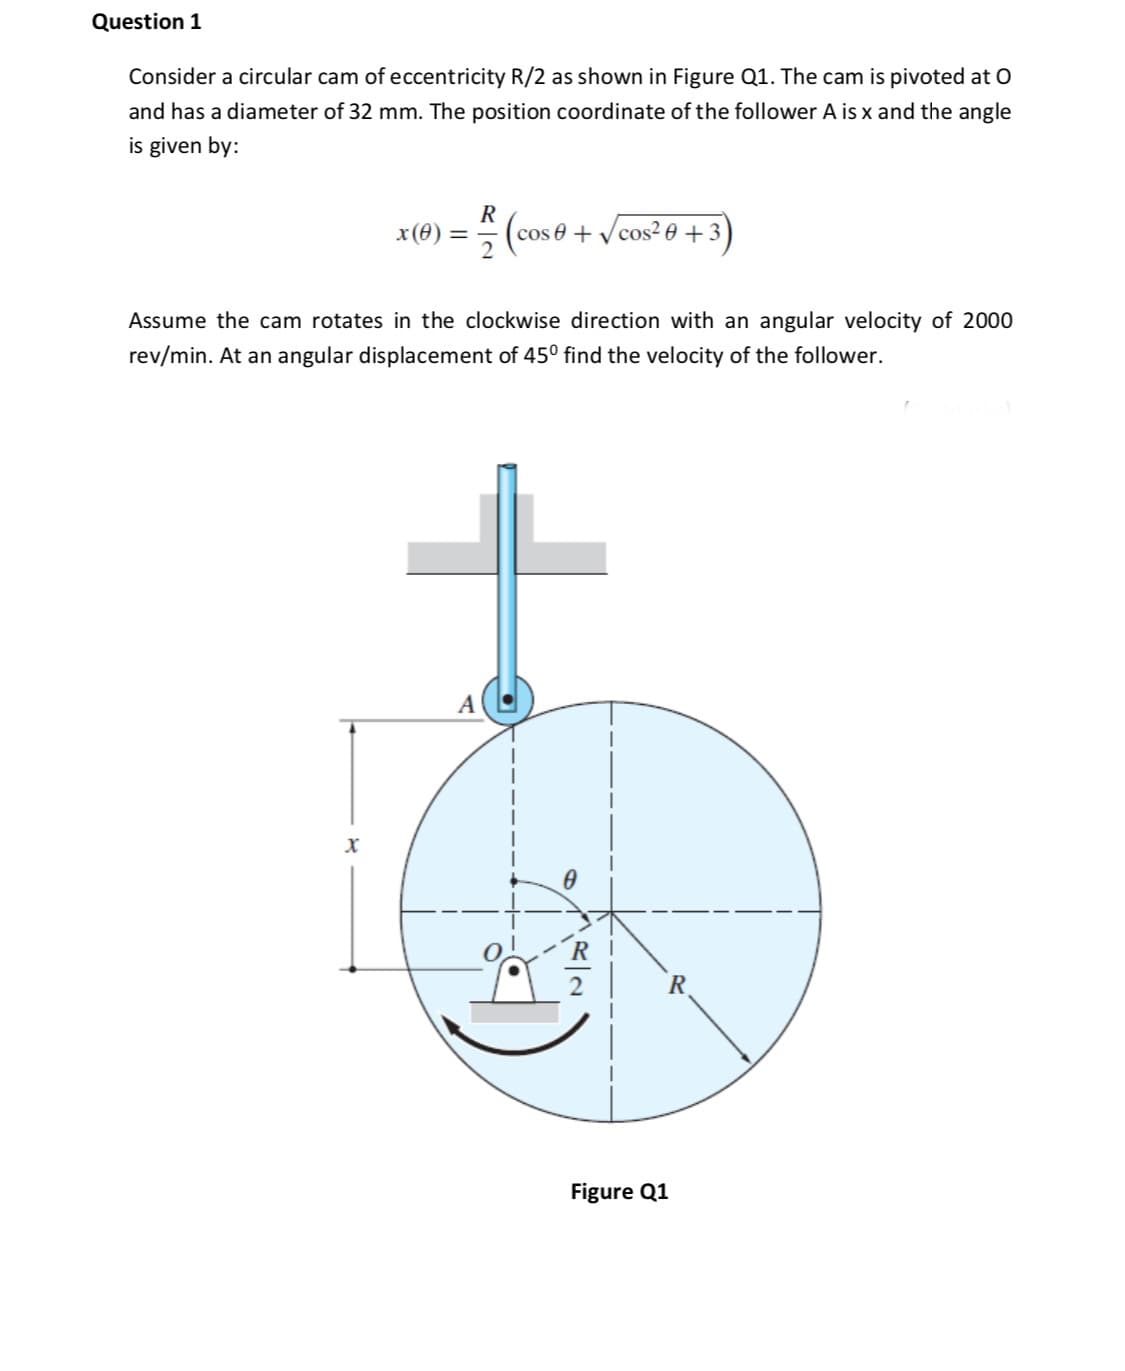 Assume the cam rotates in the clockwise direction with an angular velocity of 2000
rev/min. At an angular displacement of 45° find the velocity of the follower.
